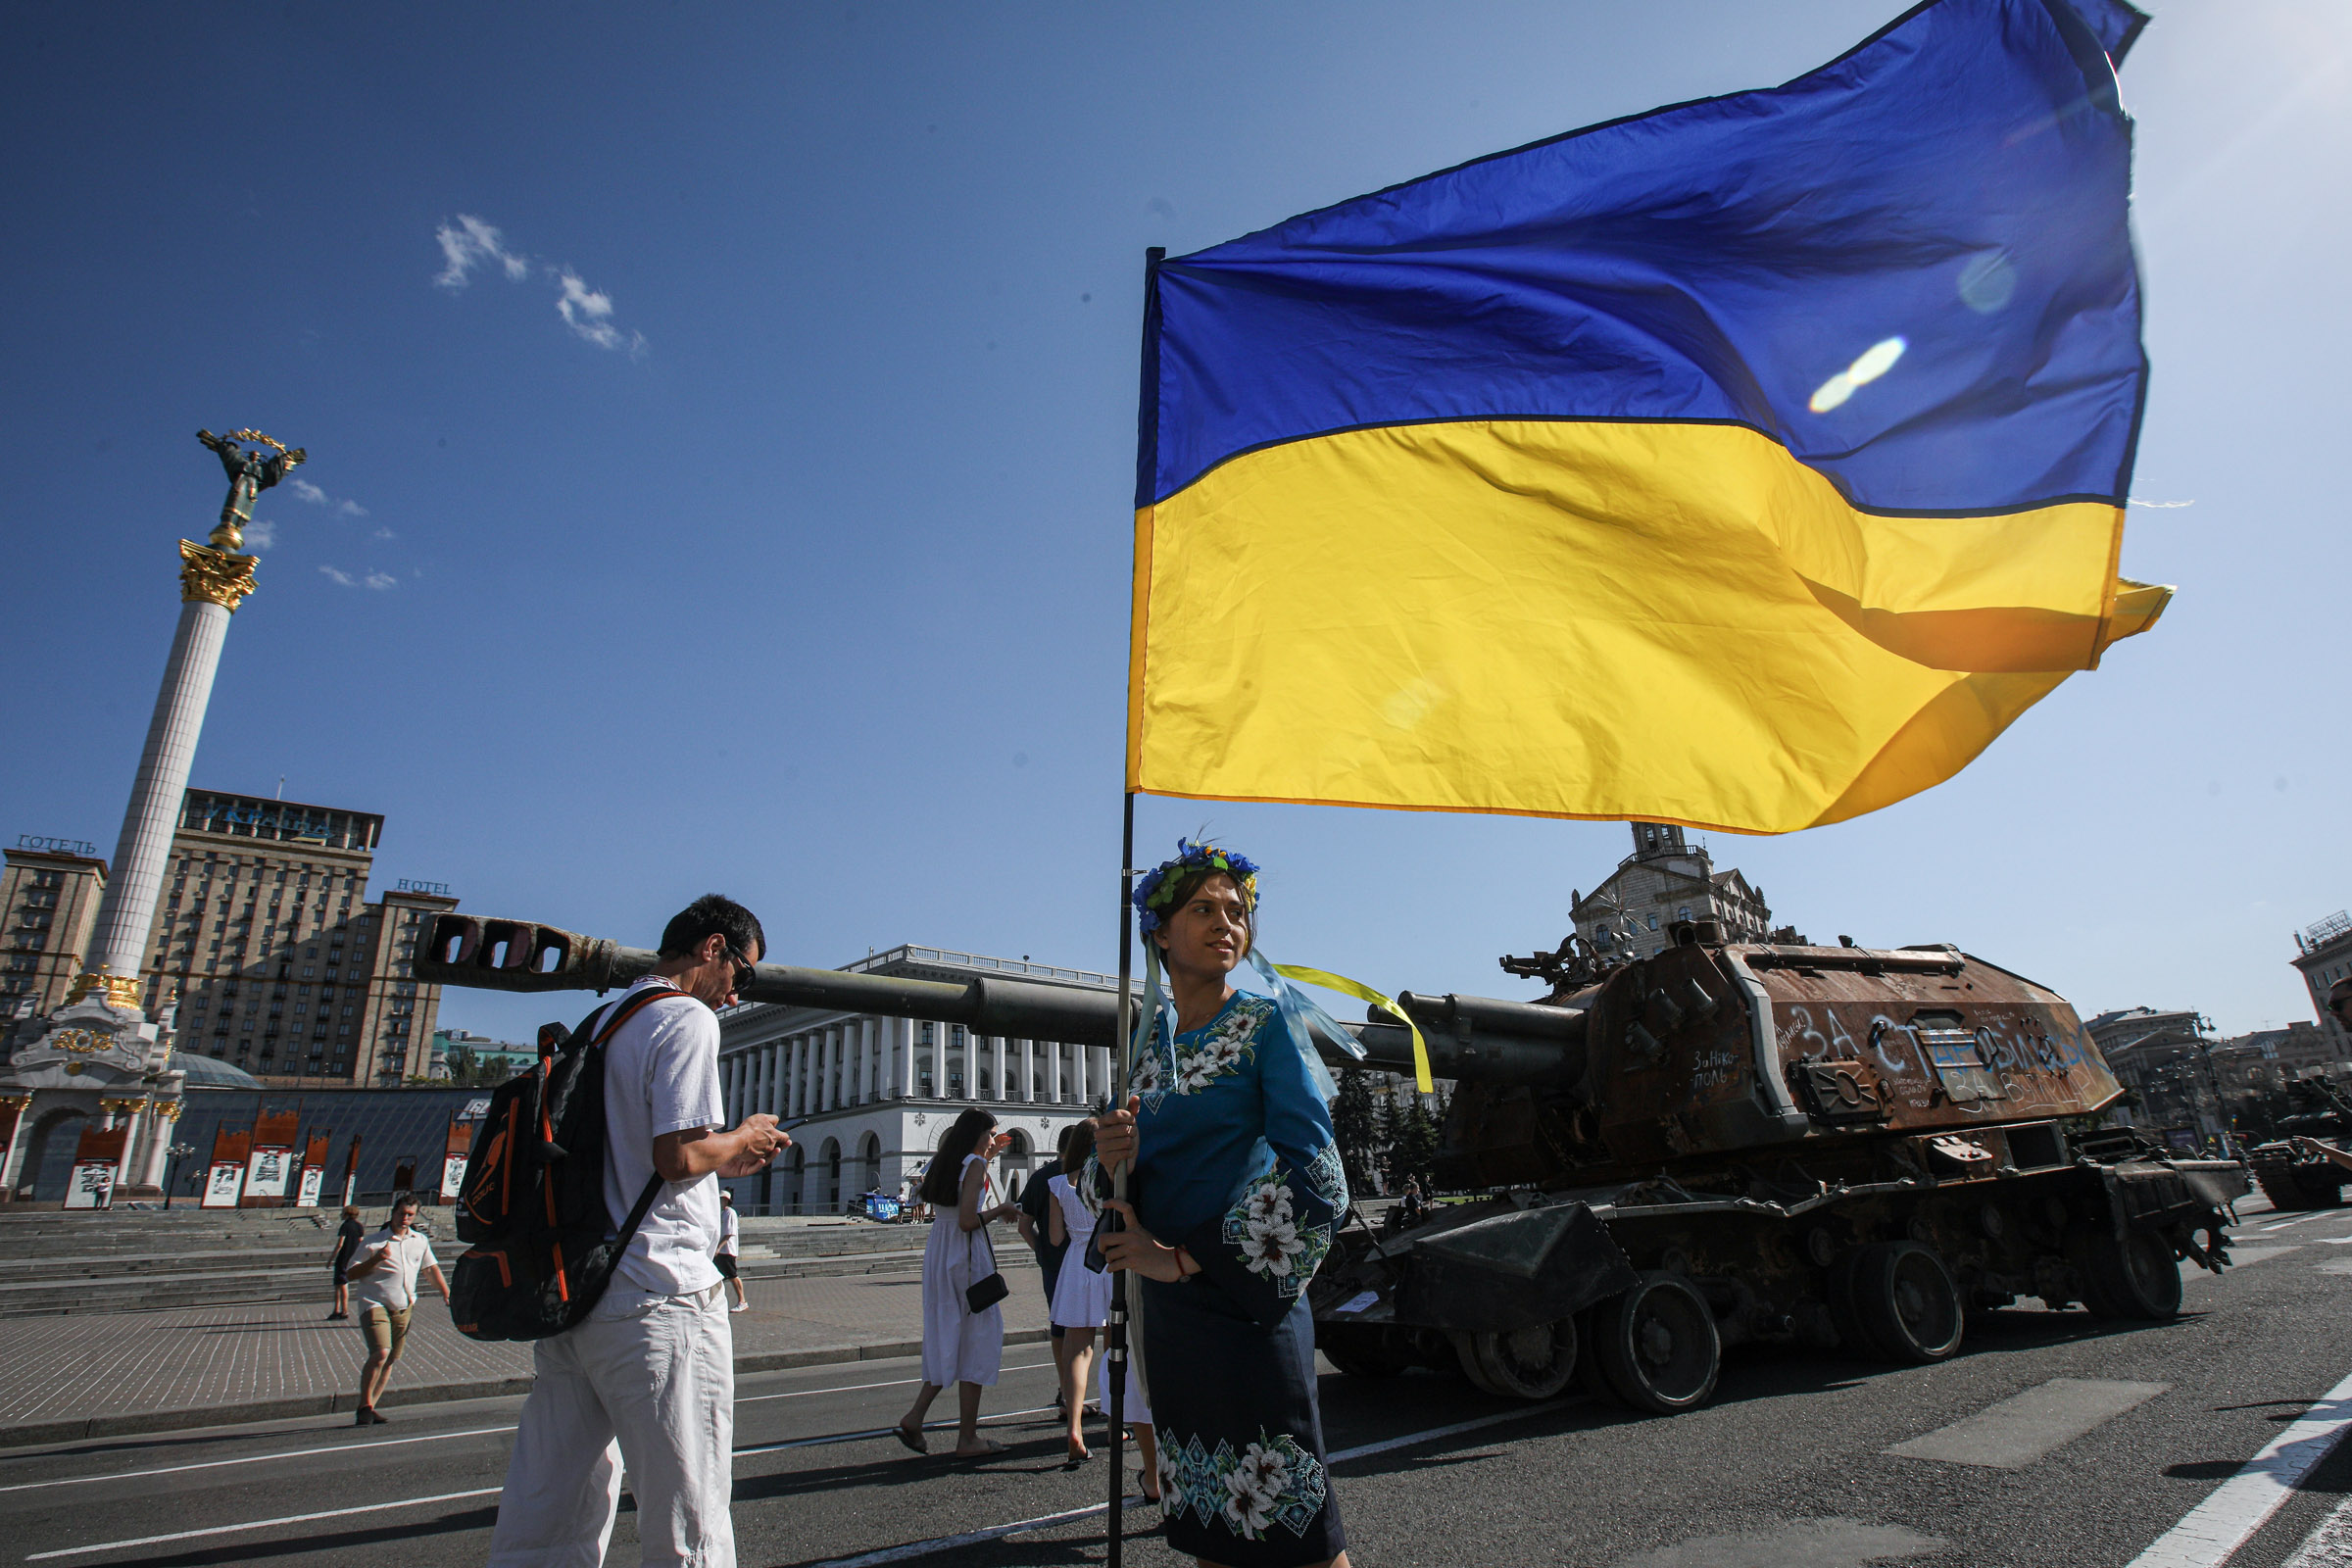 Oksana Bashuk Hepburn: Ukraine’s victory will mean changes in the West and Russia